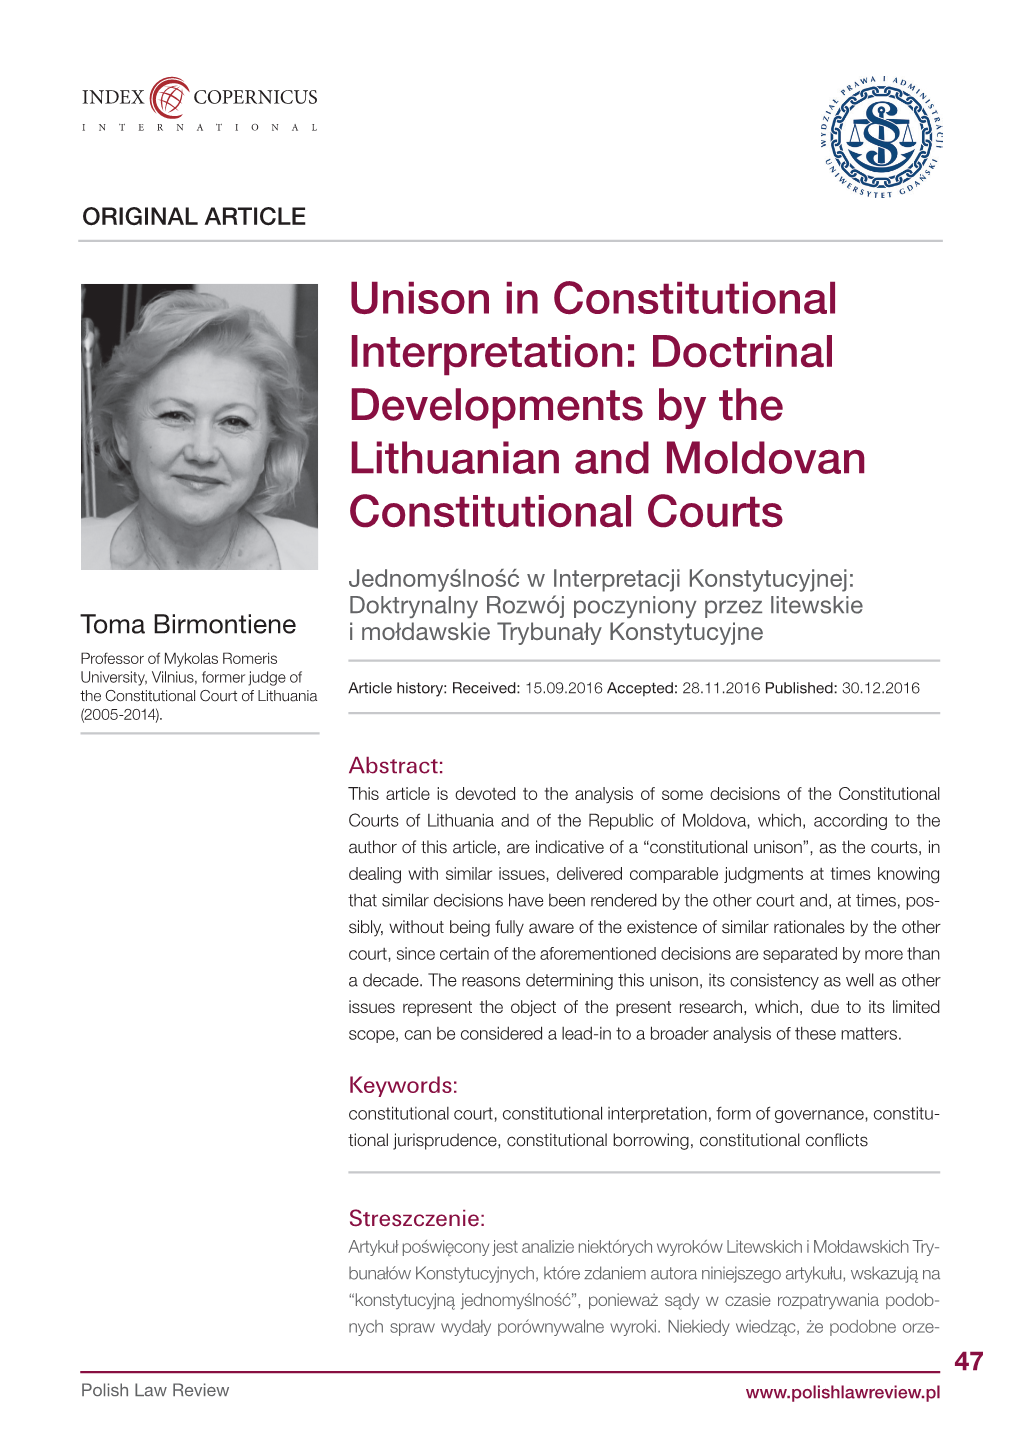 Unison in Constitutional Interpretation: Doctrinal Developments by the Lithuanian and Moldovan Constitutional Courts